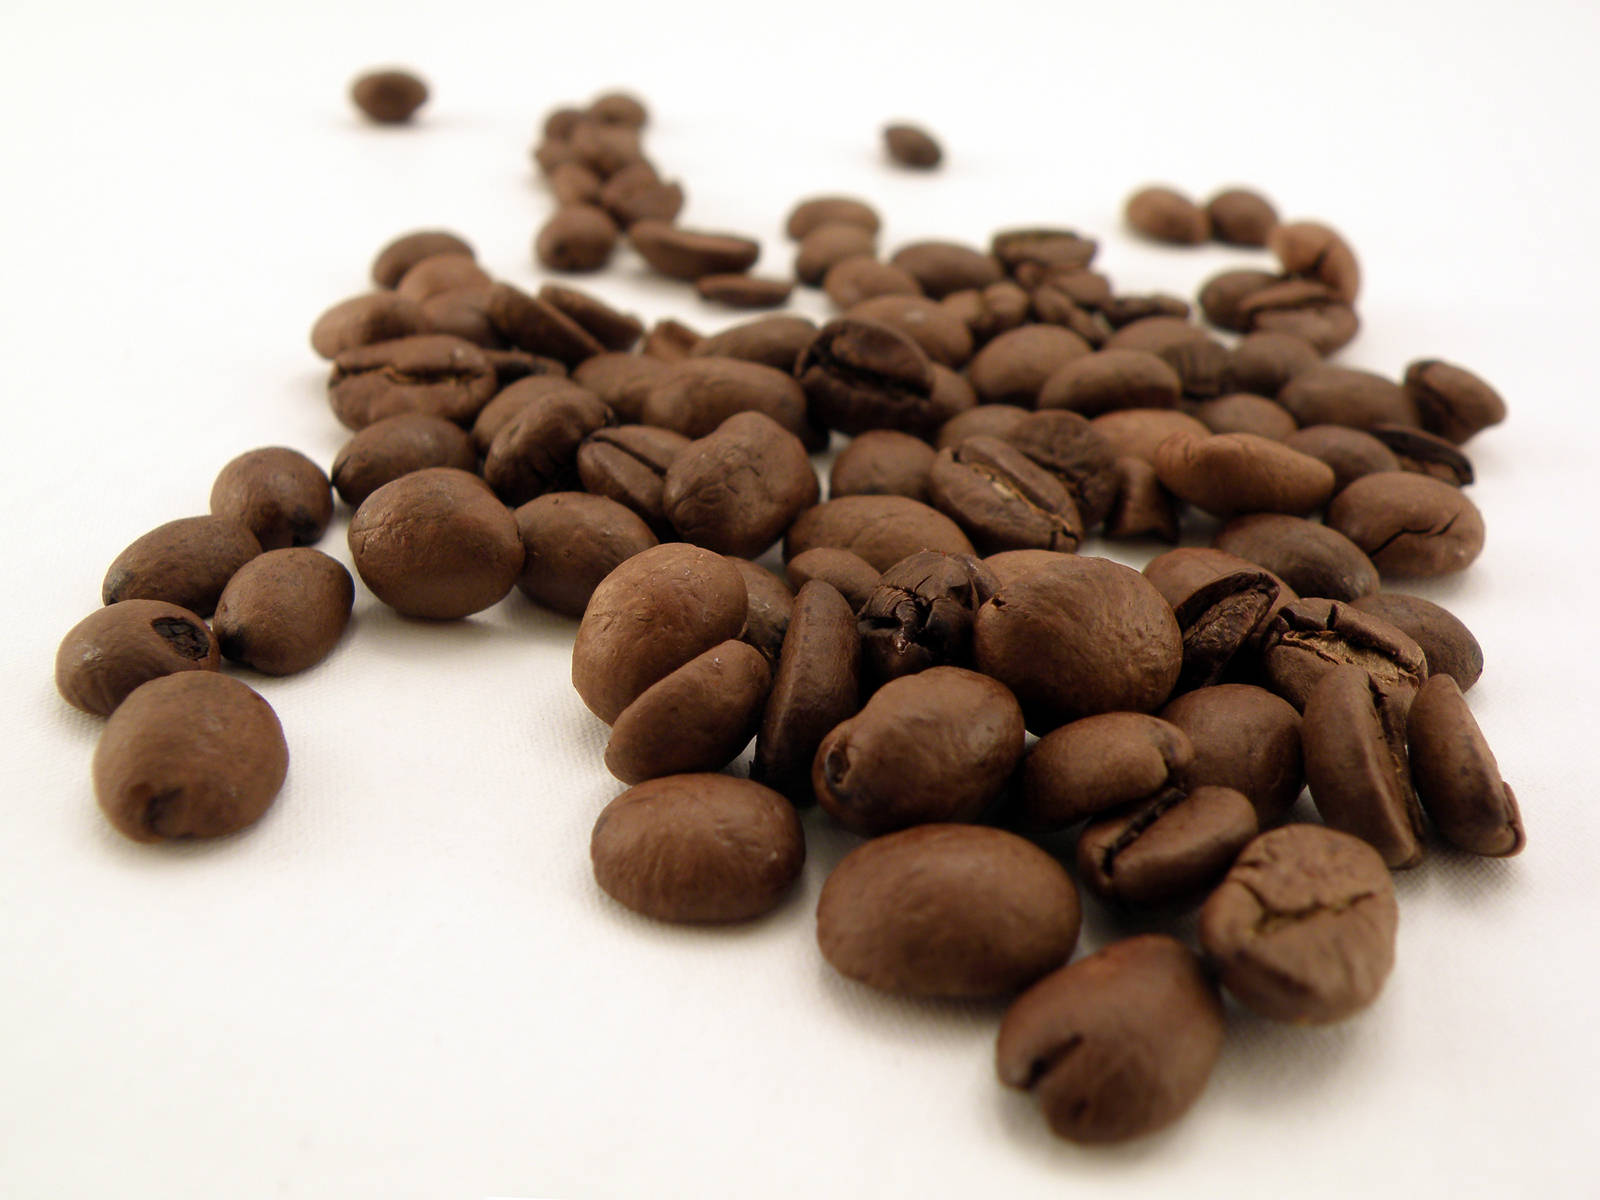 Perpsective Image Of Coffee Beans Picture